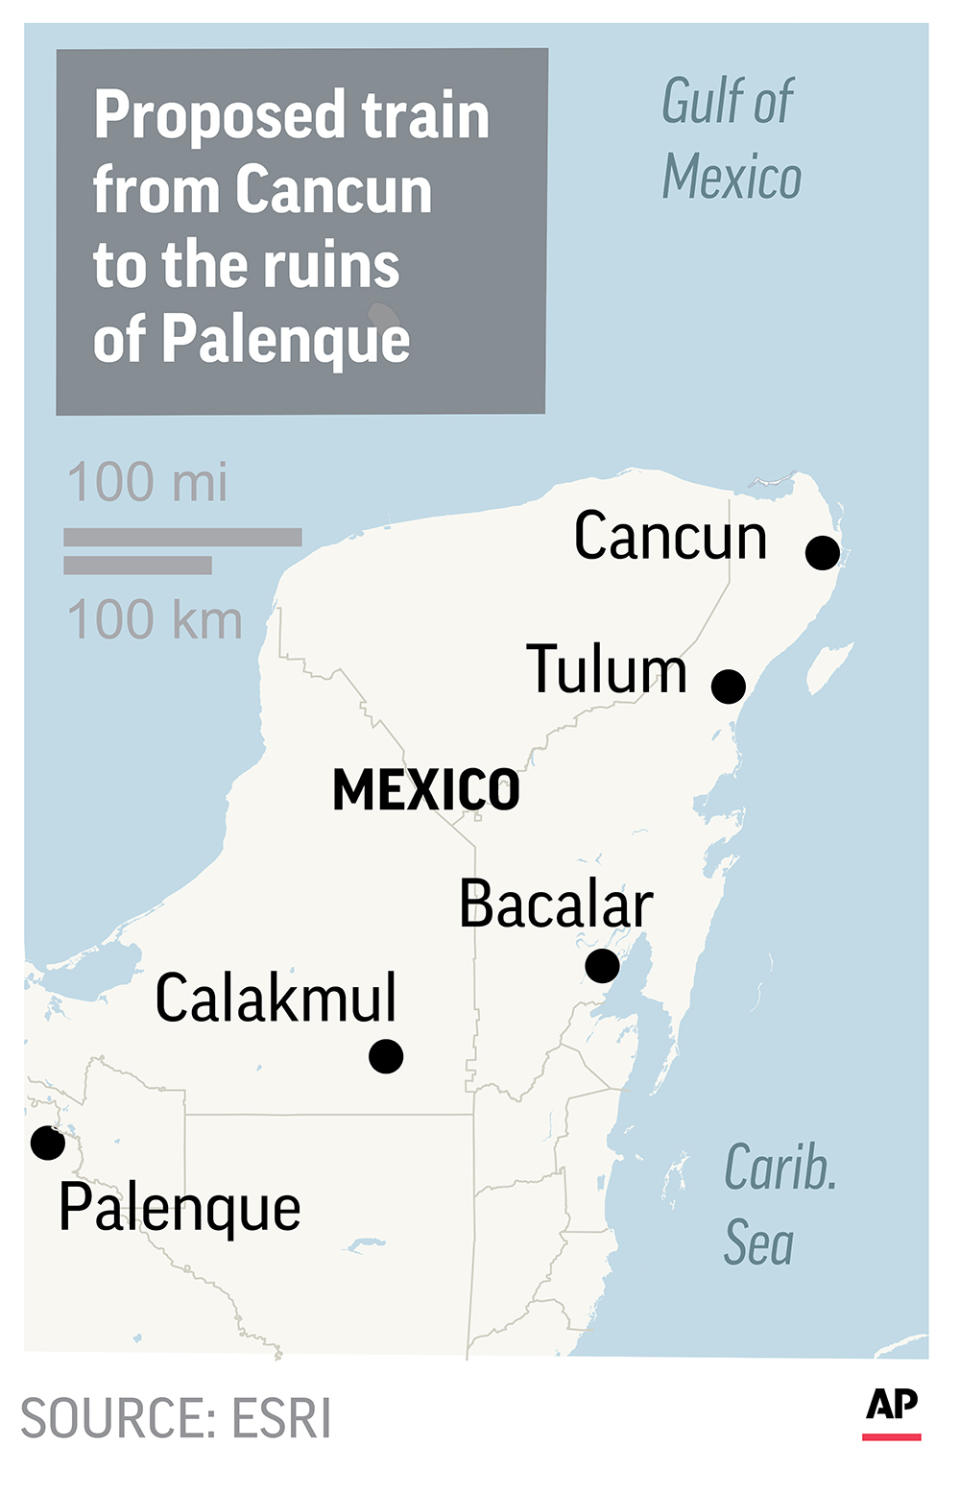 The $3.2 billion train would run from the resort of Cancun to the Mayan ruins of Palenque across the Yucatan peninsula.